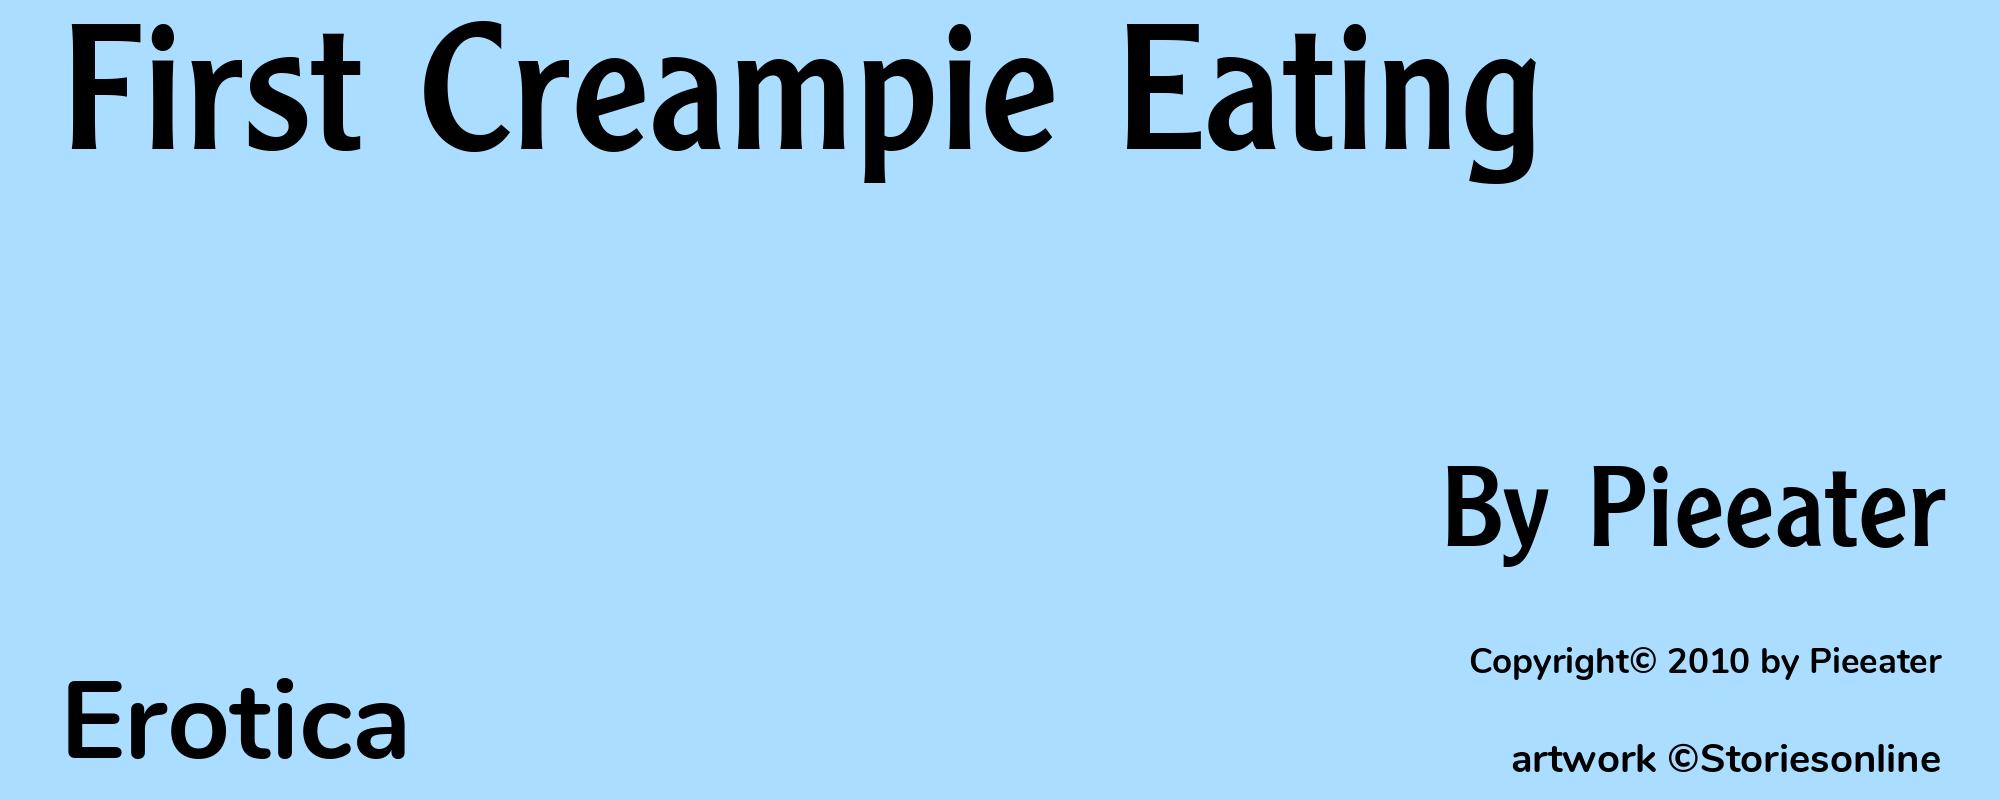 First Creampie Eating - Cover